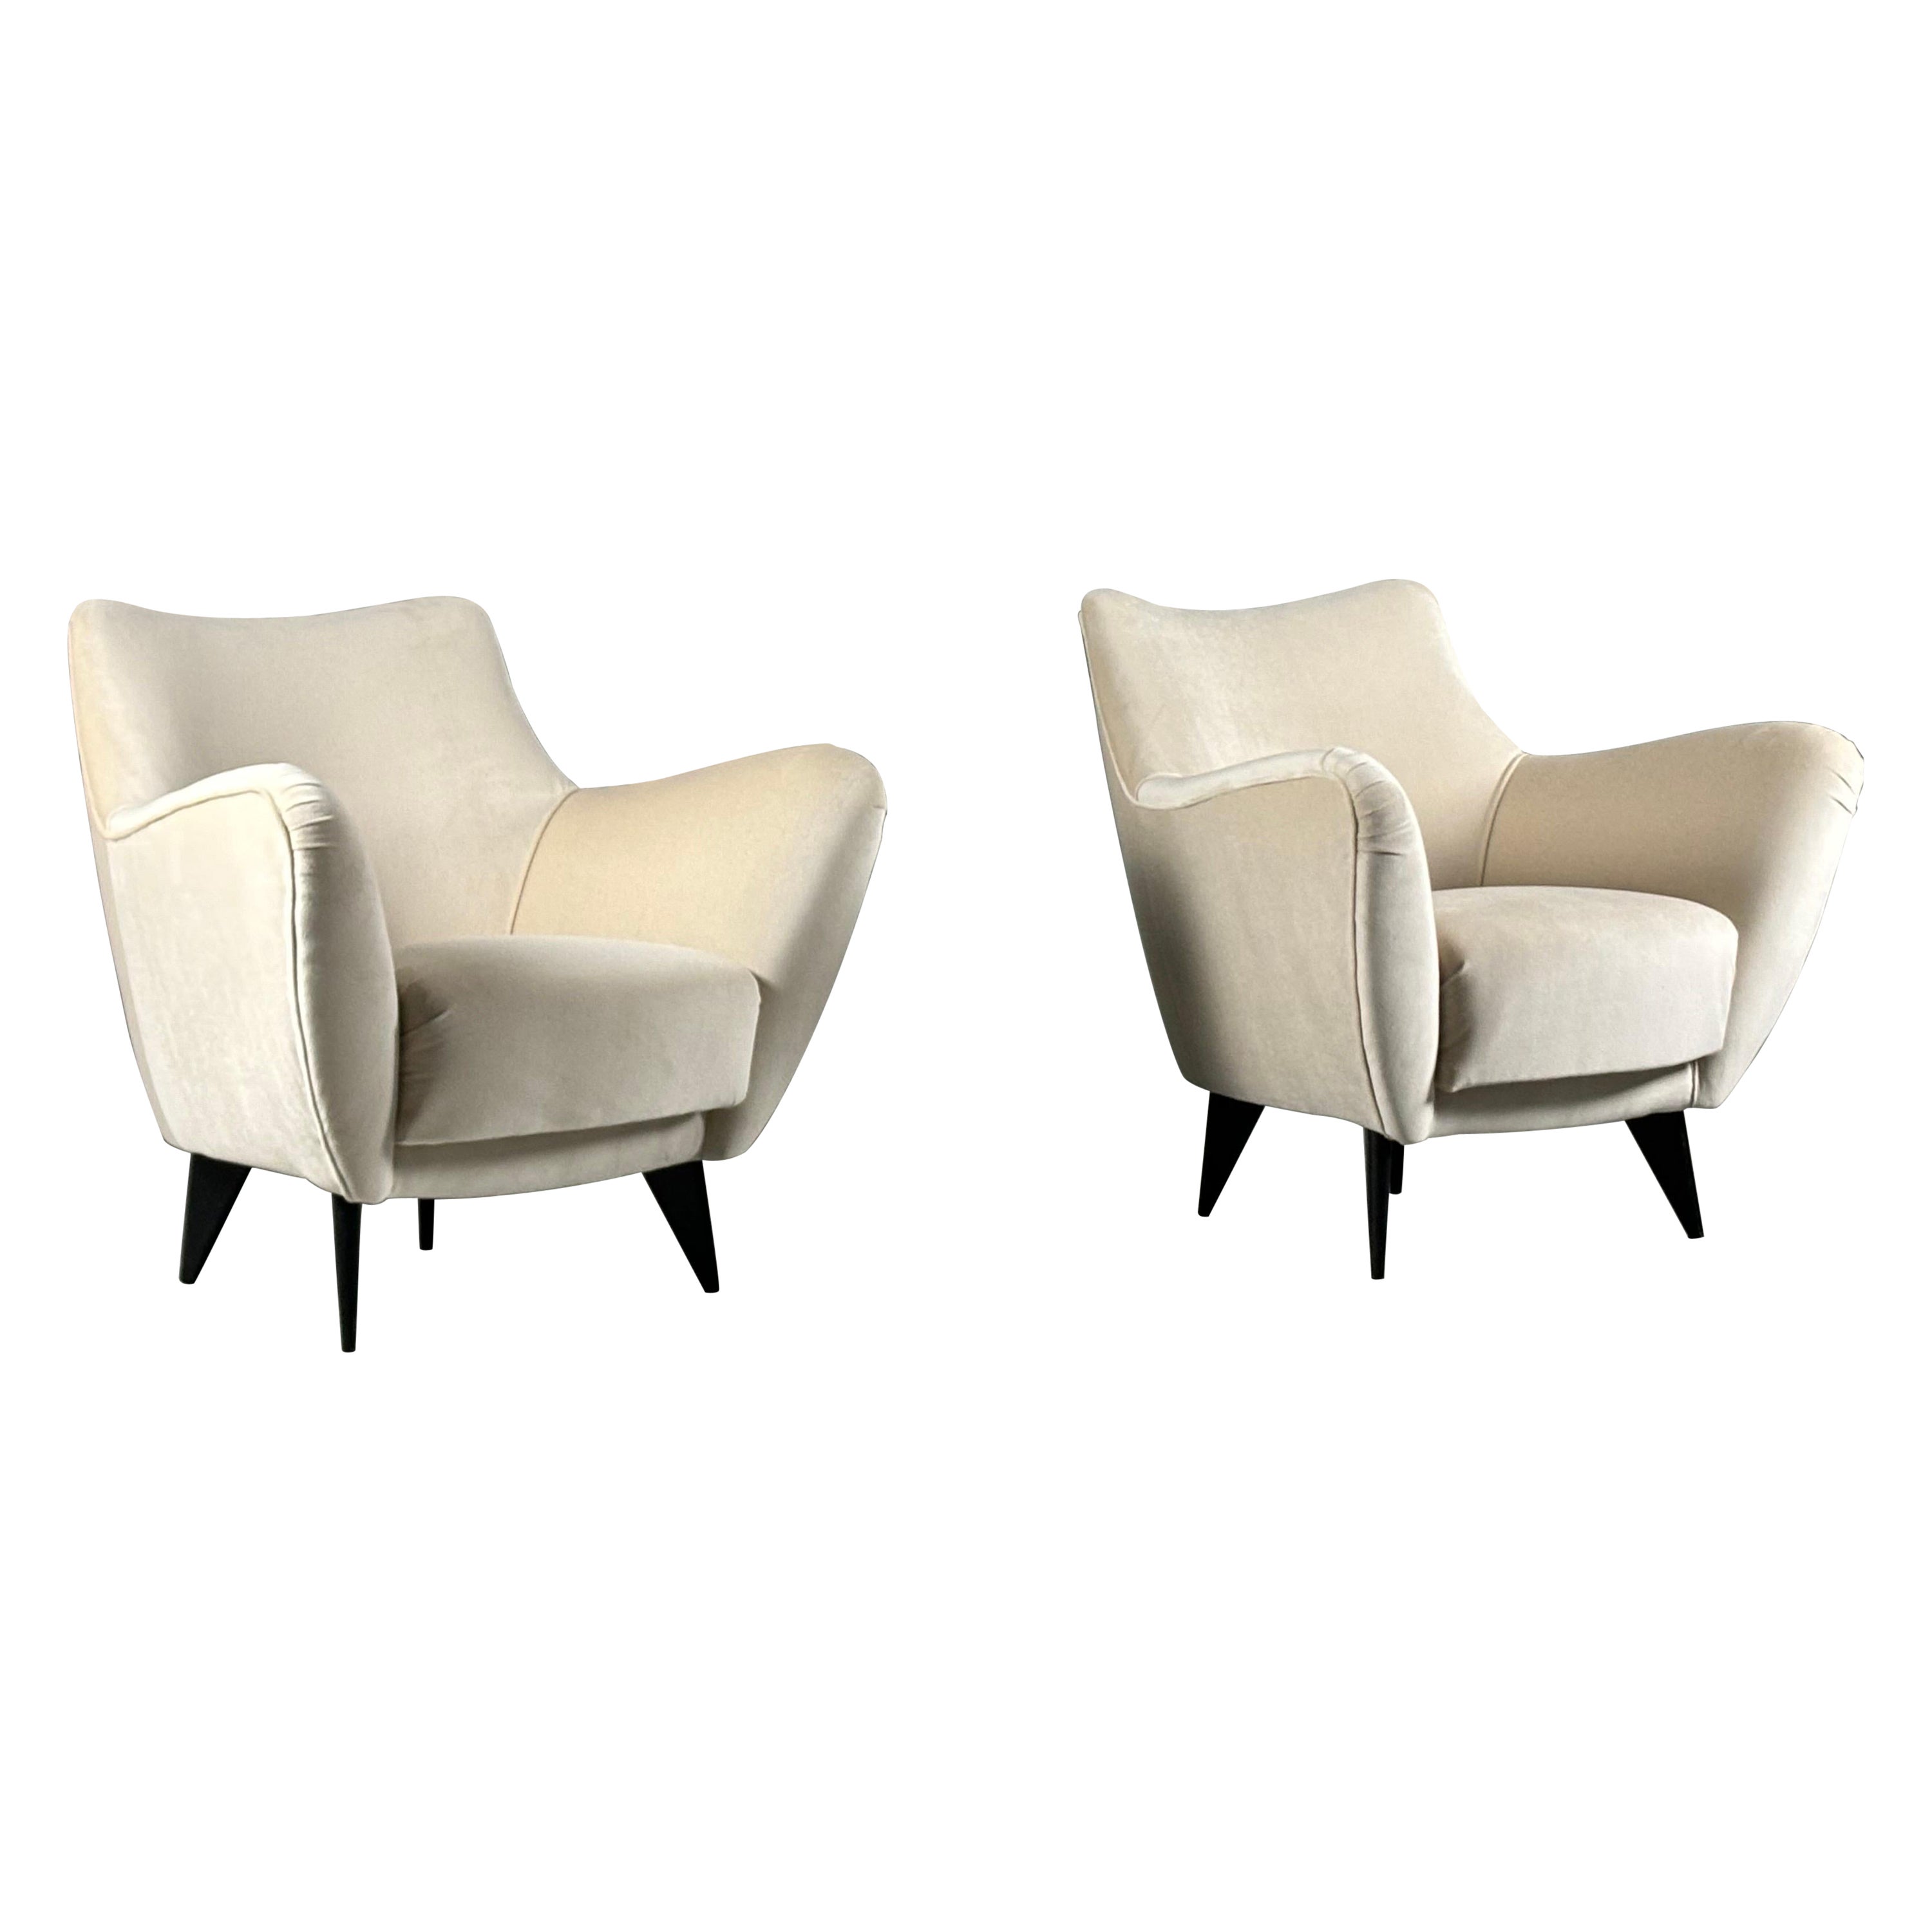 Guglielmo Veronesi armchairs by ISA, Italy, 1950s, set of 2 For Sale